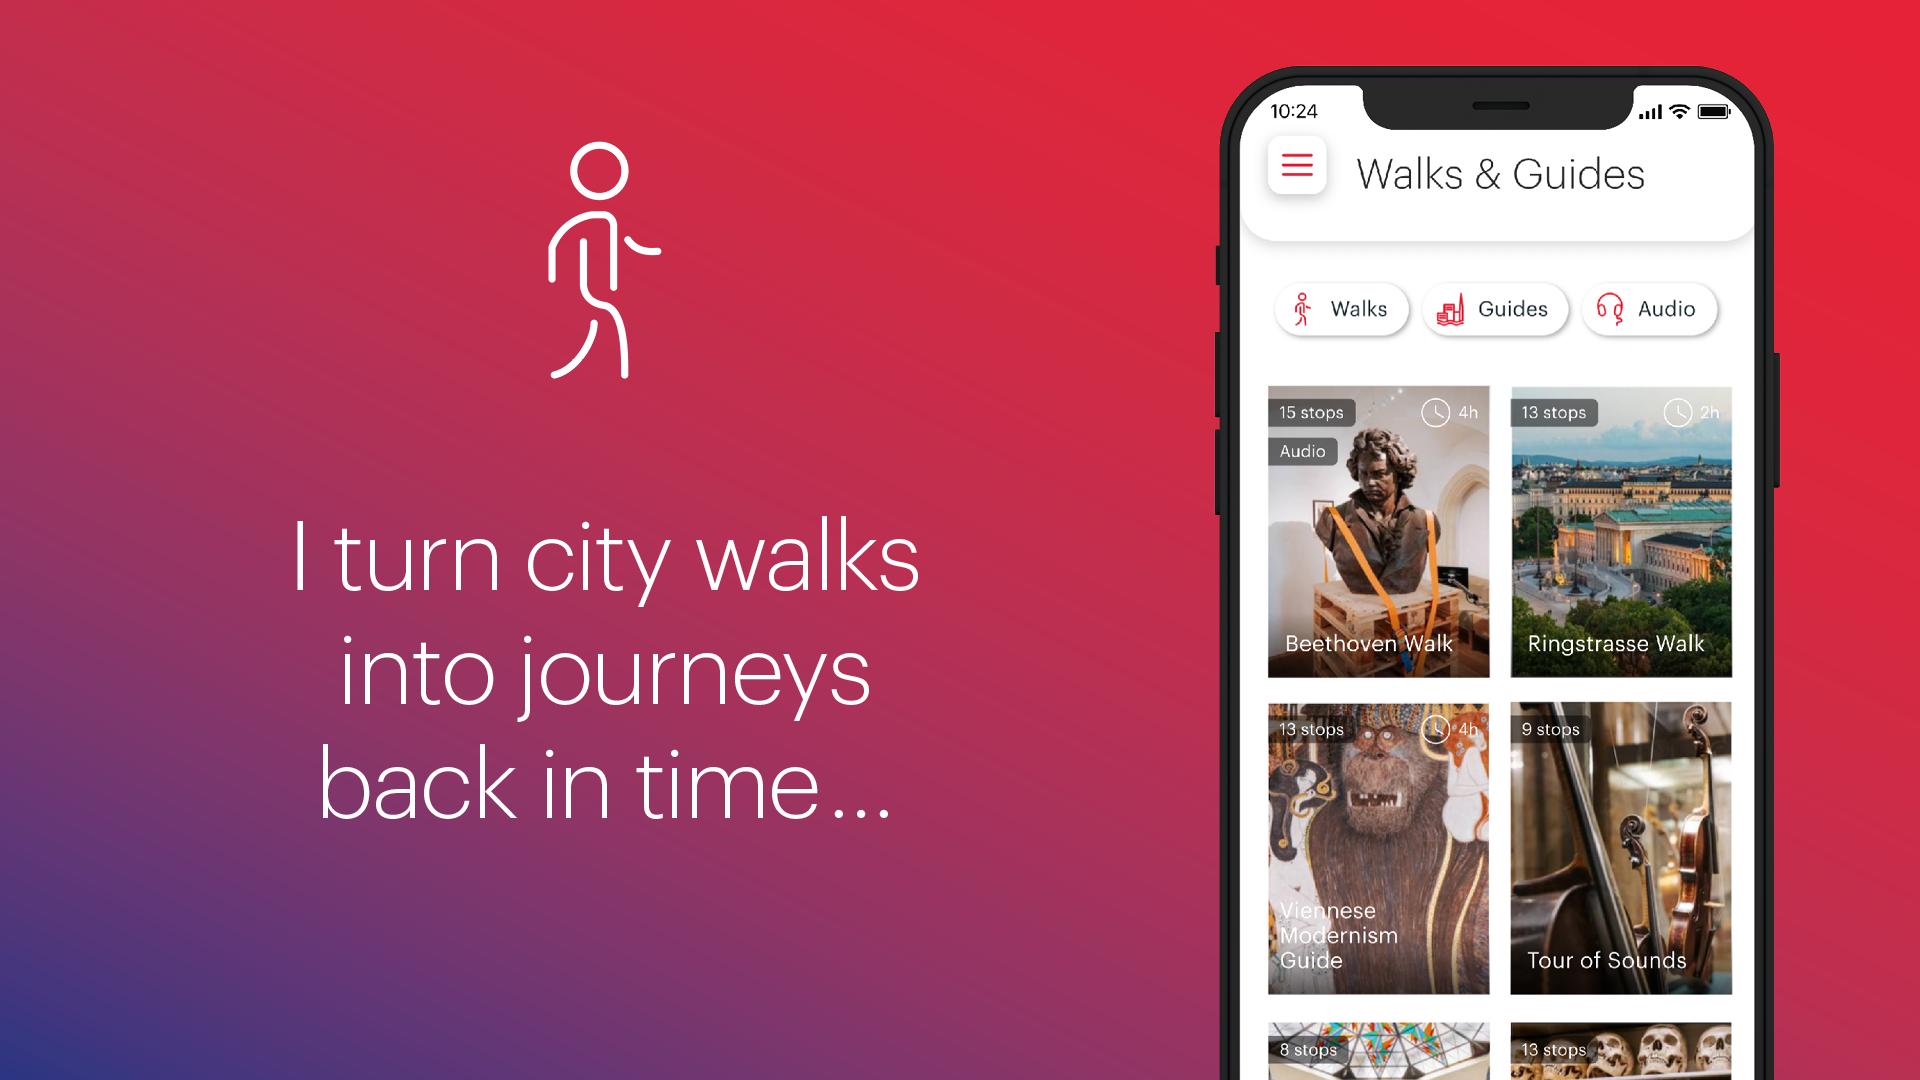 ivie City Guide App – Walks and Guides